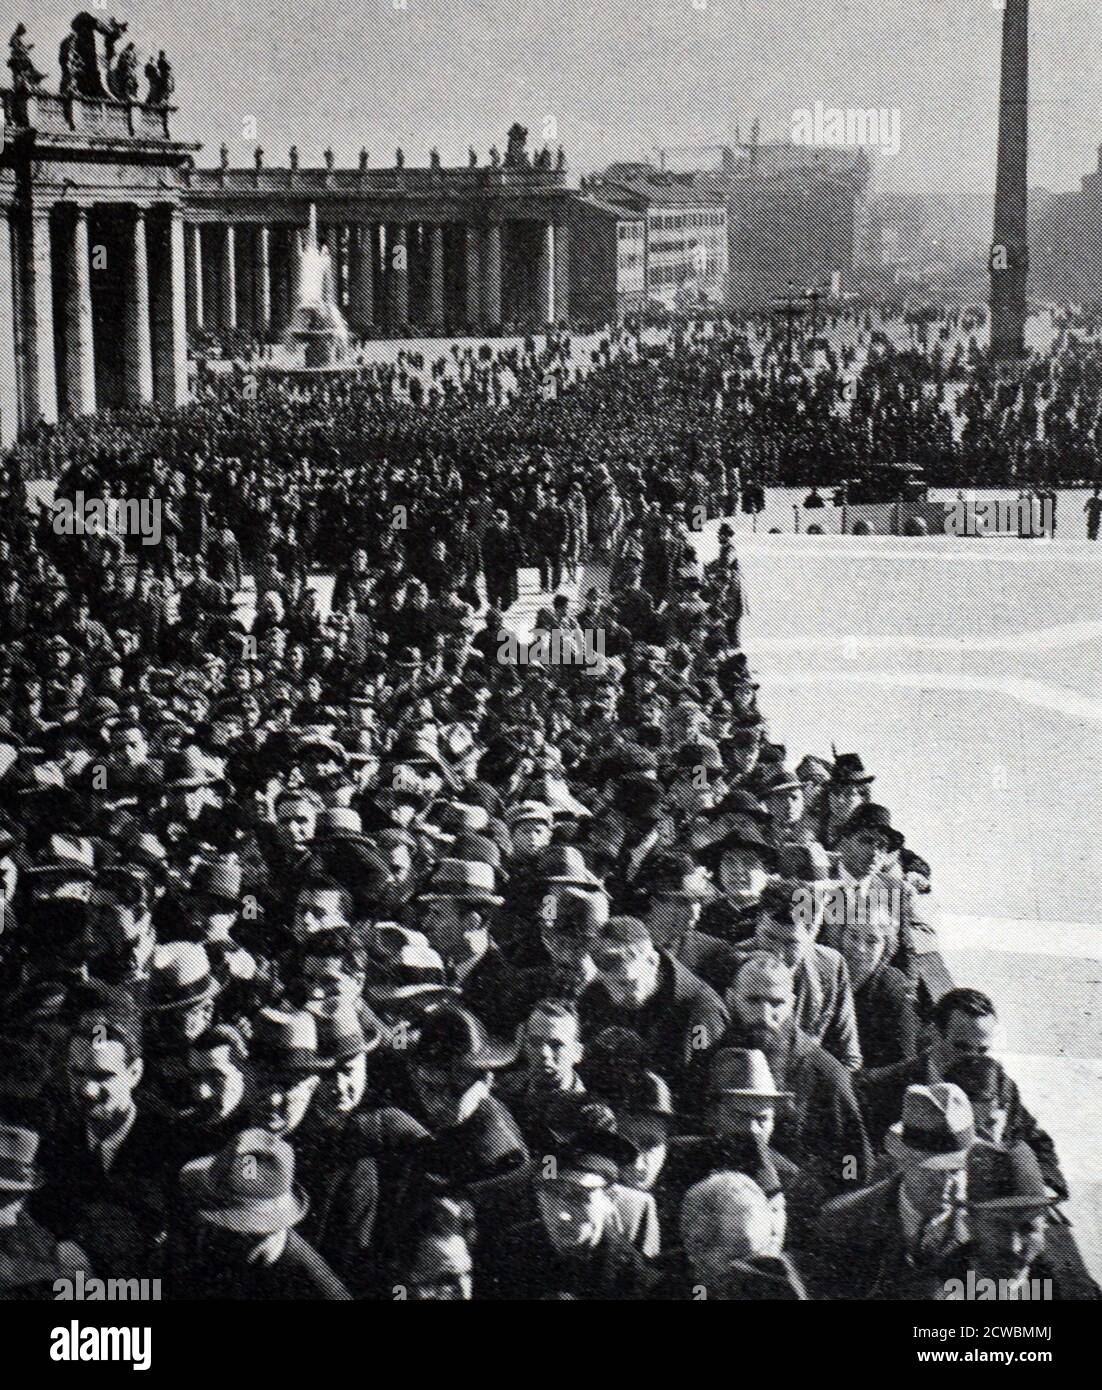 Black and white photograph of people filing through St. Peter's Square in Rome to walk past the remains o the Holy Father, Pope Pius XI (1857-1939; pope from 1922). Stock Photo